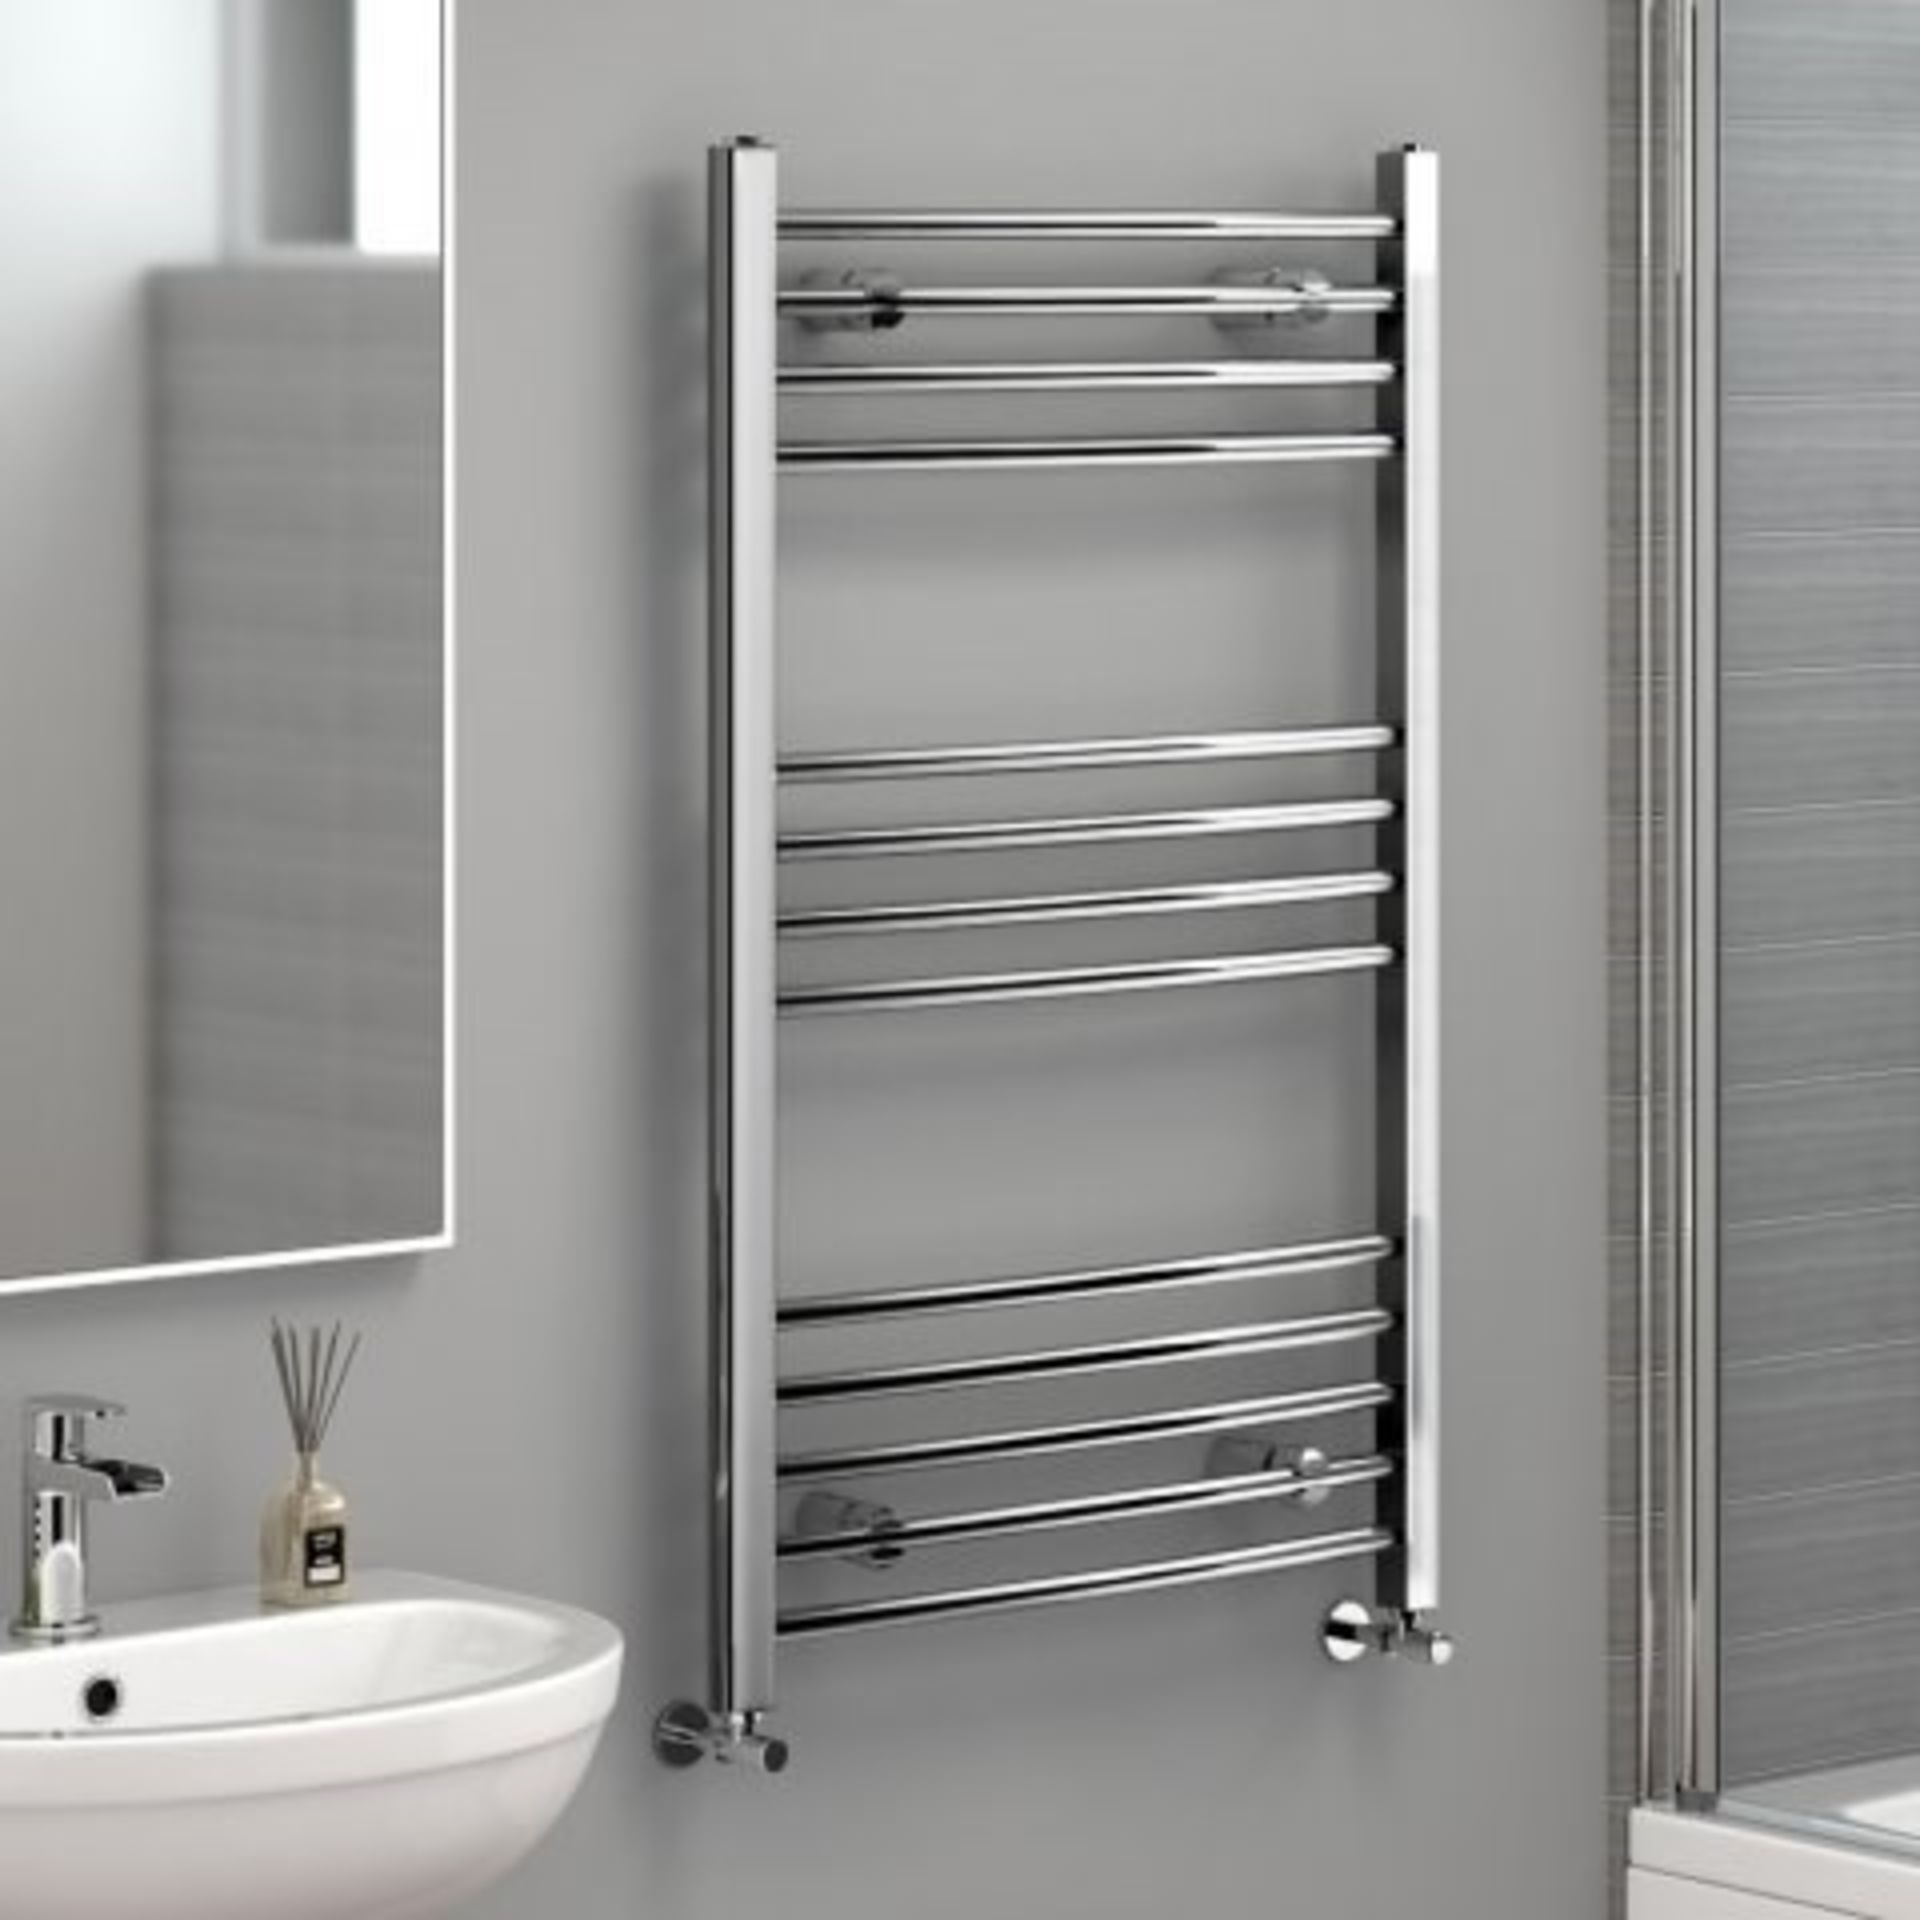 New 1200x500mm - 20mm Tubes - Rrp £219.99.Chrome Curved Rail Ladder Towel Radiator.Our Nancy 1...